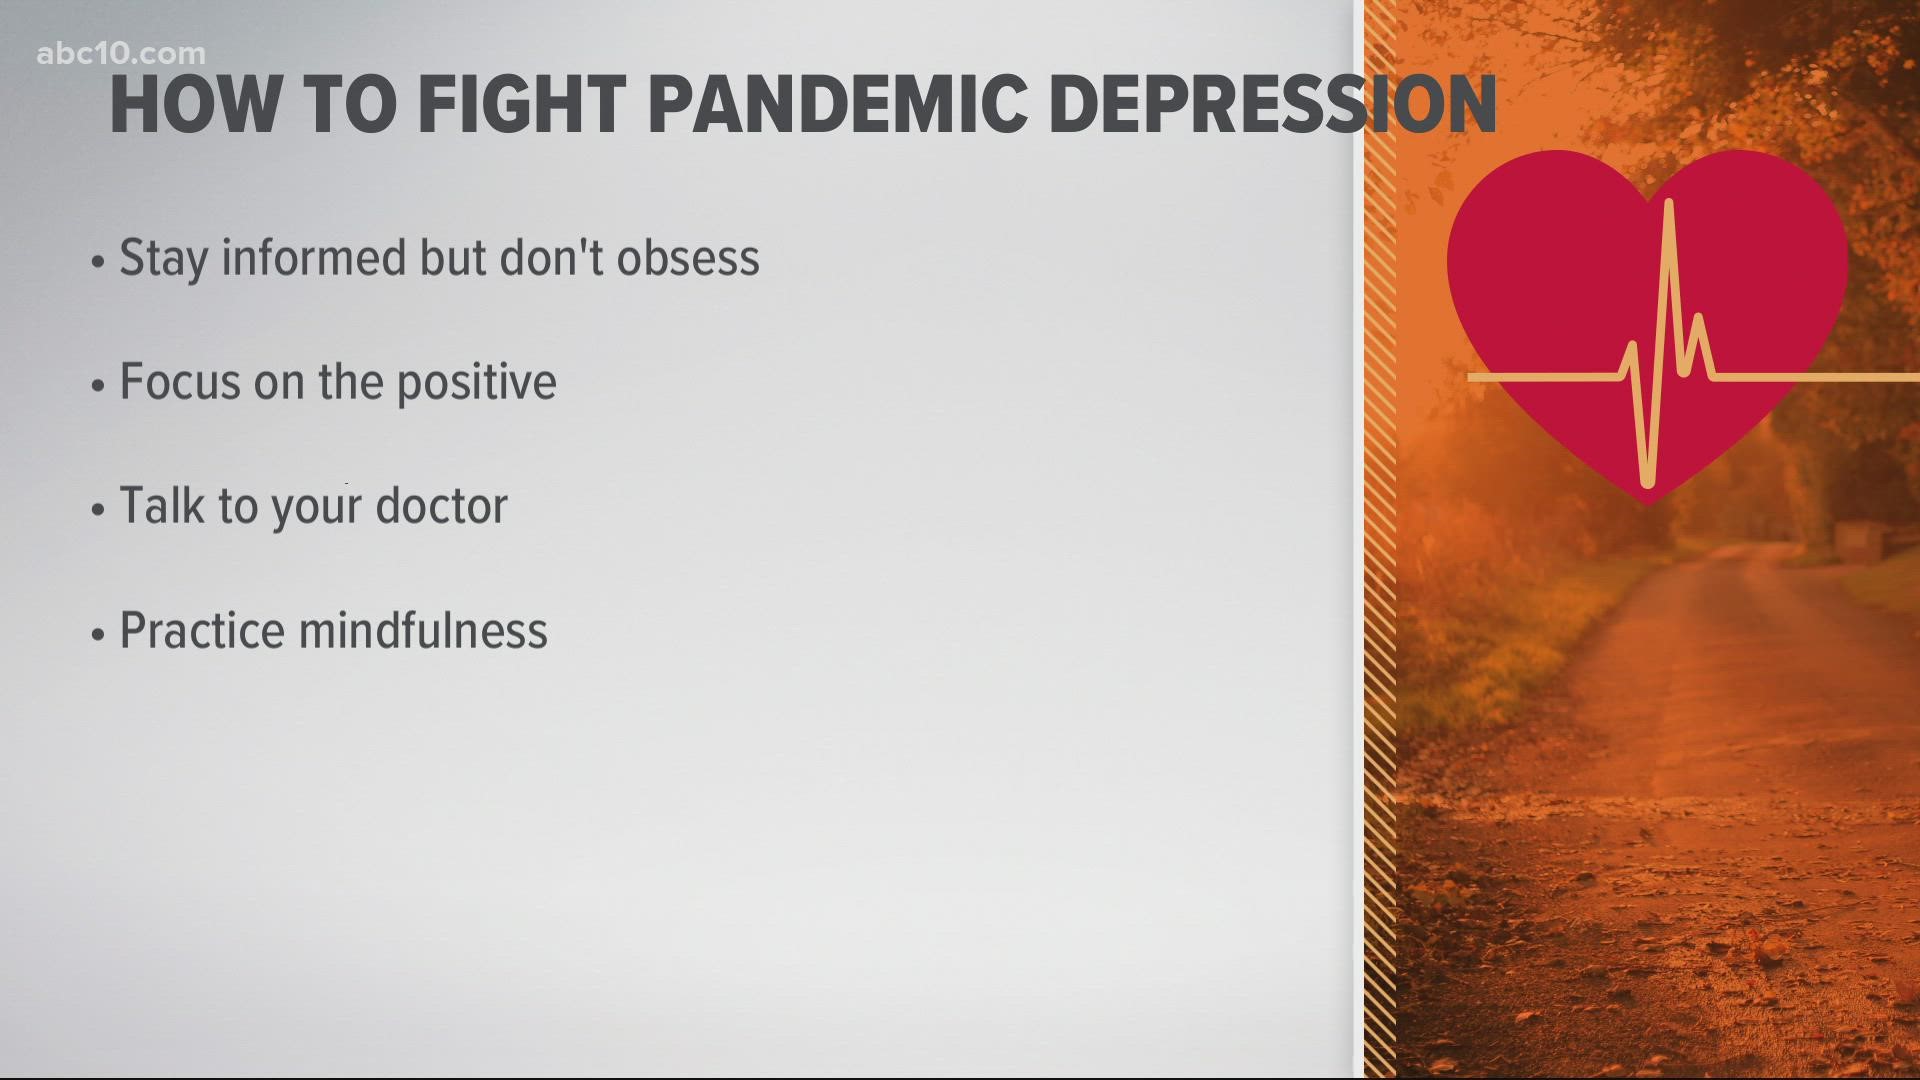 On this morning's Health Beat, our Brea Love takes a look at how depression and anxiety levels among some people have fluctuated throughout the COVID-19 pandemic.